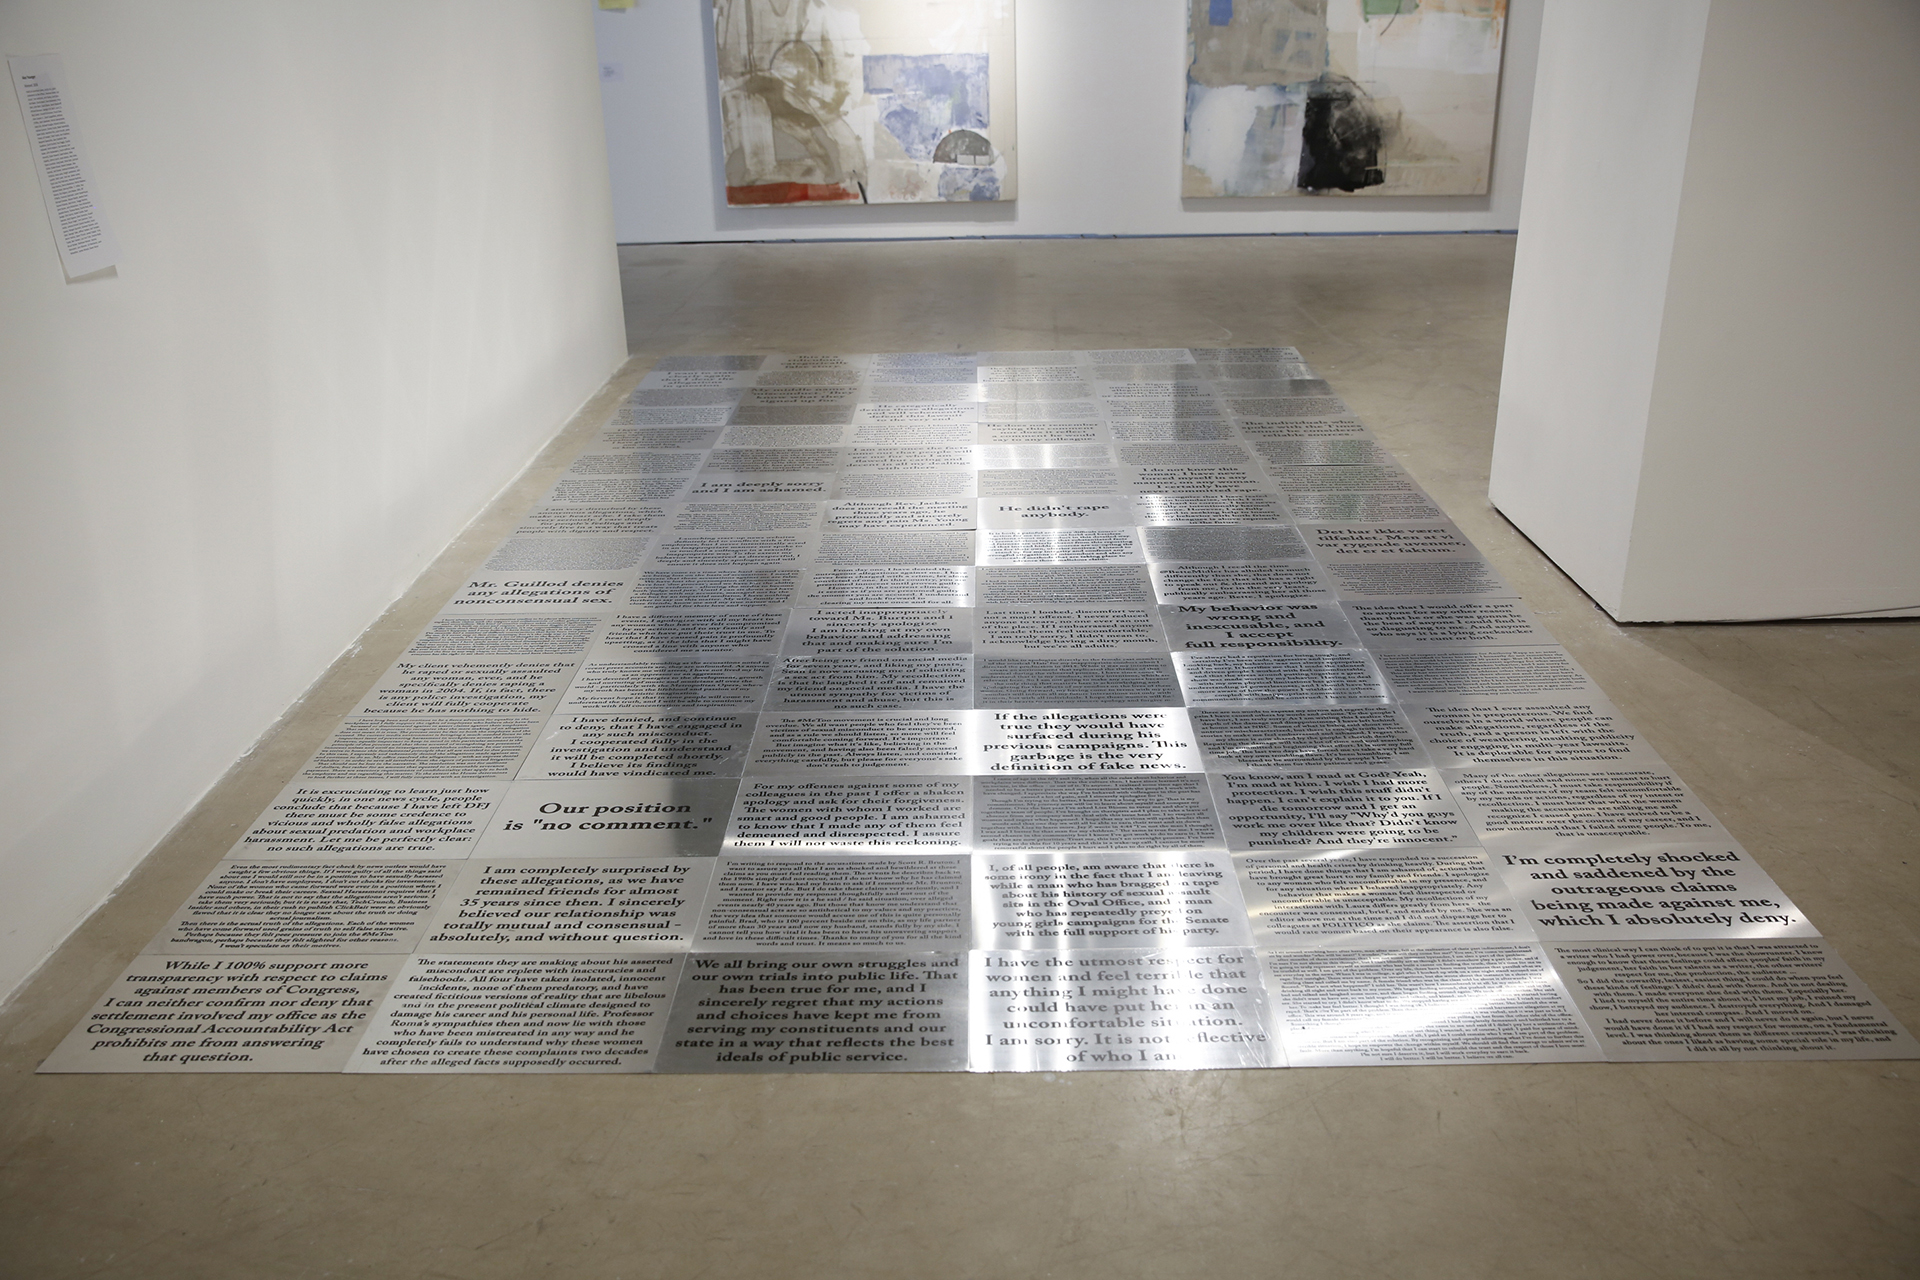 146 hand cut aluminum plates, screenprinted with the statements made by each public figure accused of sexual assault or harassment since Harvey Weinstein 96 plates shown displayed, erased through public interaction and maintained through performances to replace erased plates